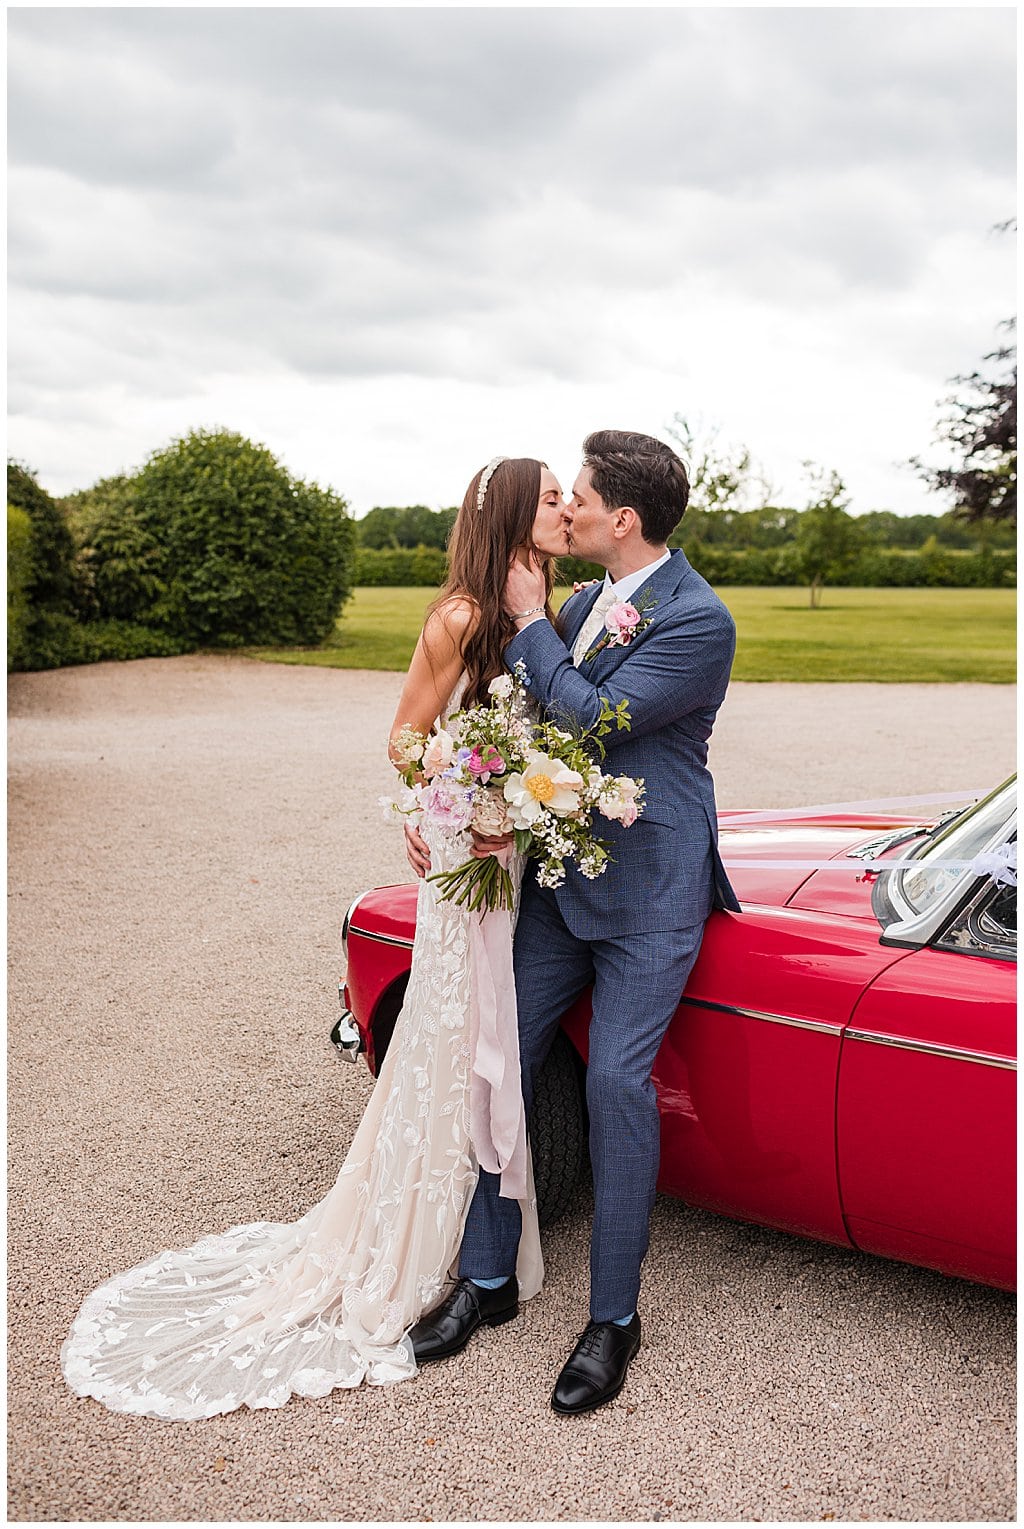 Bride wearing strappy lace wedding dress kissing her Groom, sitting on a red sports car 